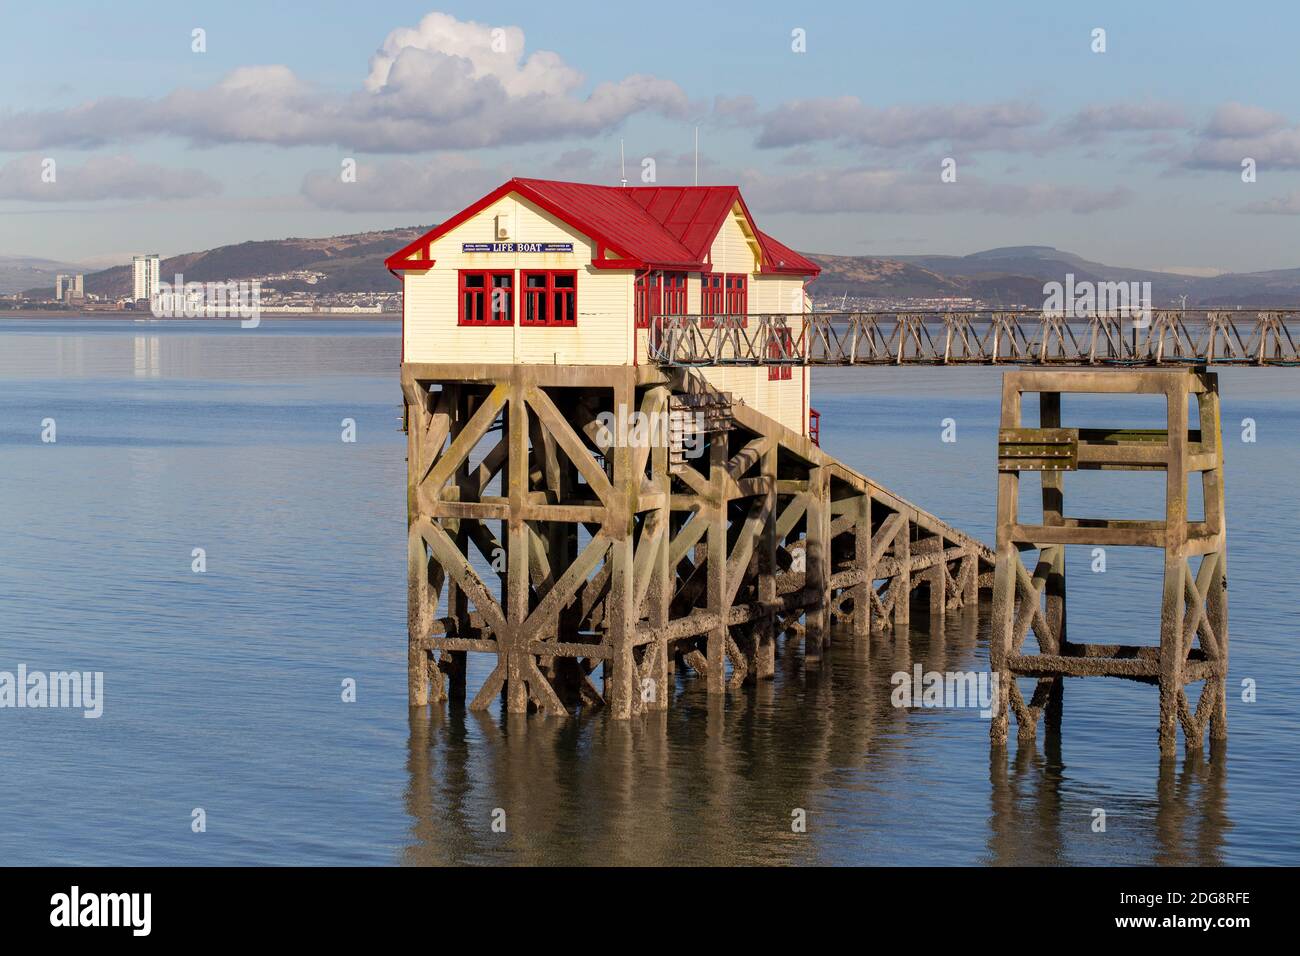 MuMBLES, Gower, South Wales - January 19, 2015:  The old lifeboat house at the end of Mumbles pier, looking over Swansea Bay Stock Photo